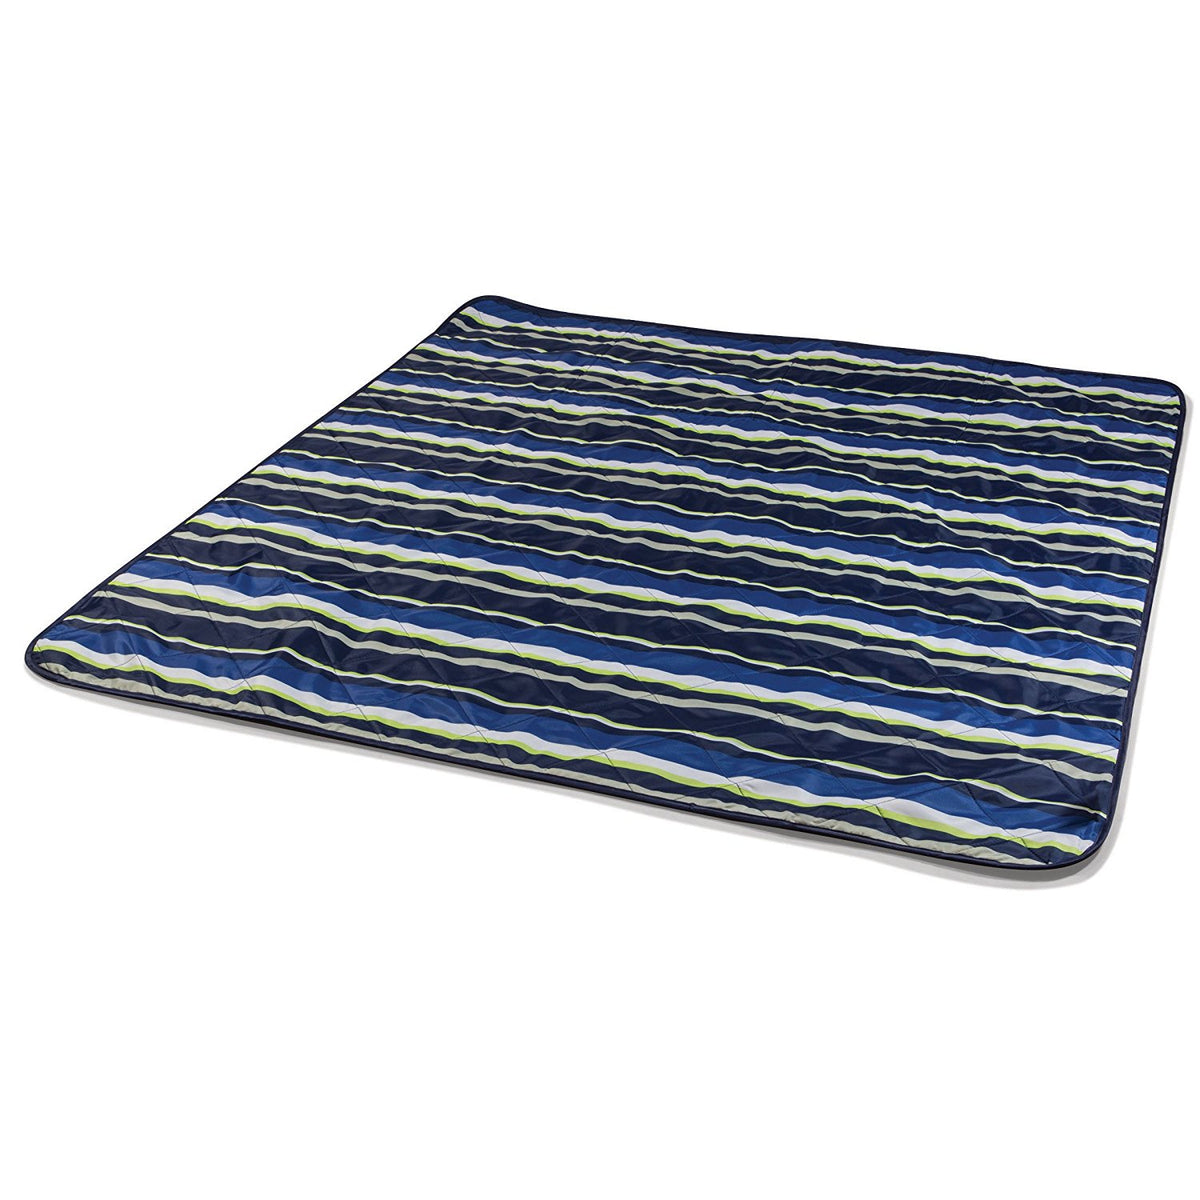 Picnic Time 821-00-138 Outdoor Polyester Blanket, Navy Blue